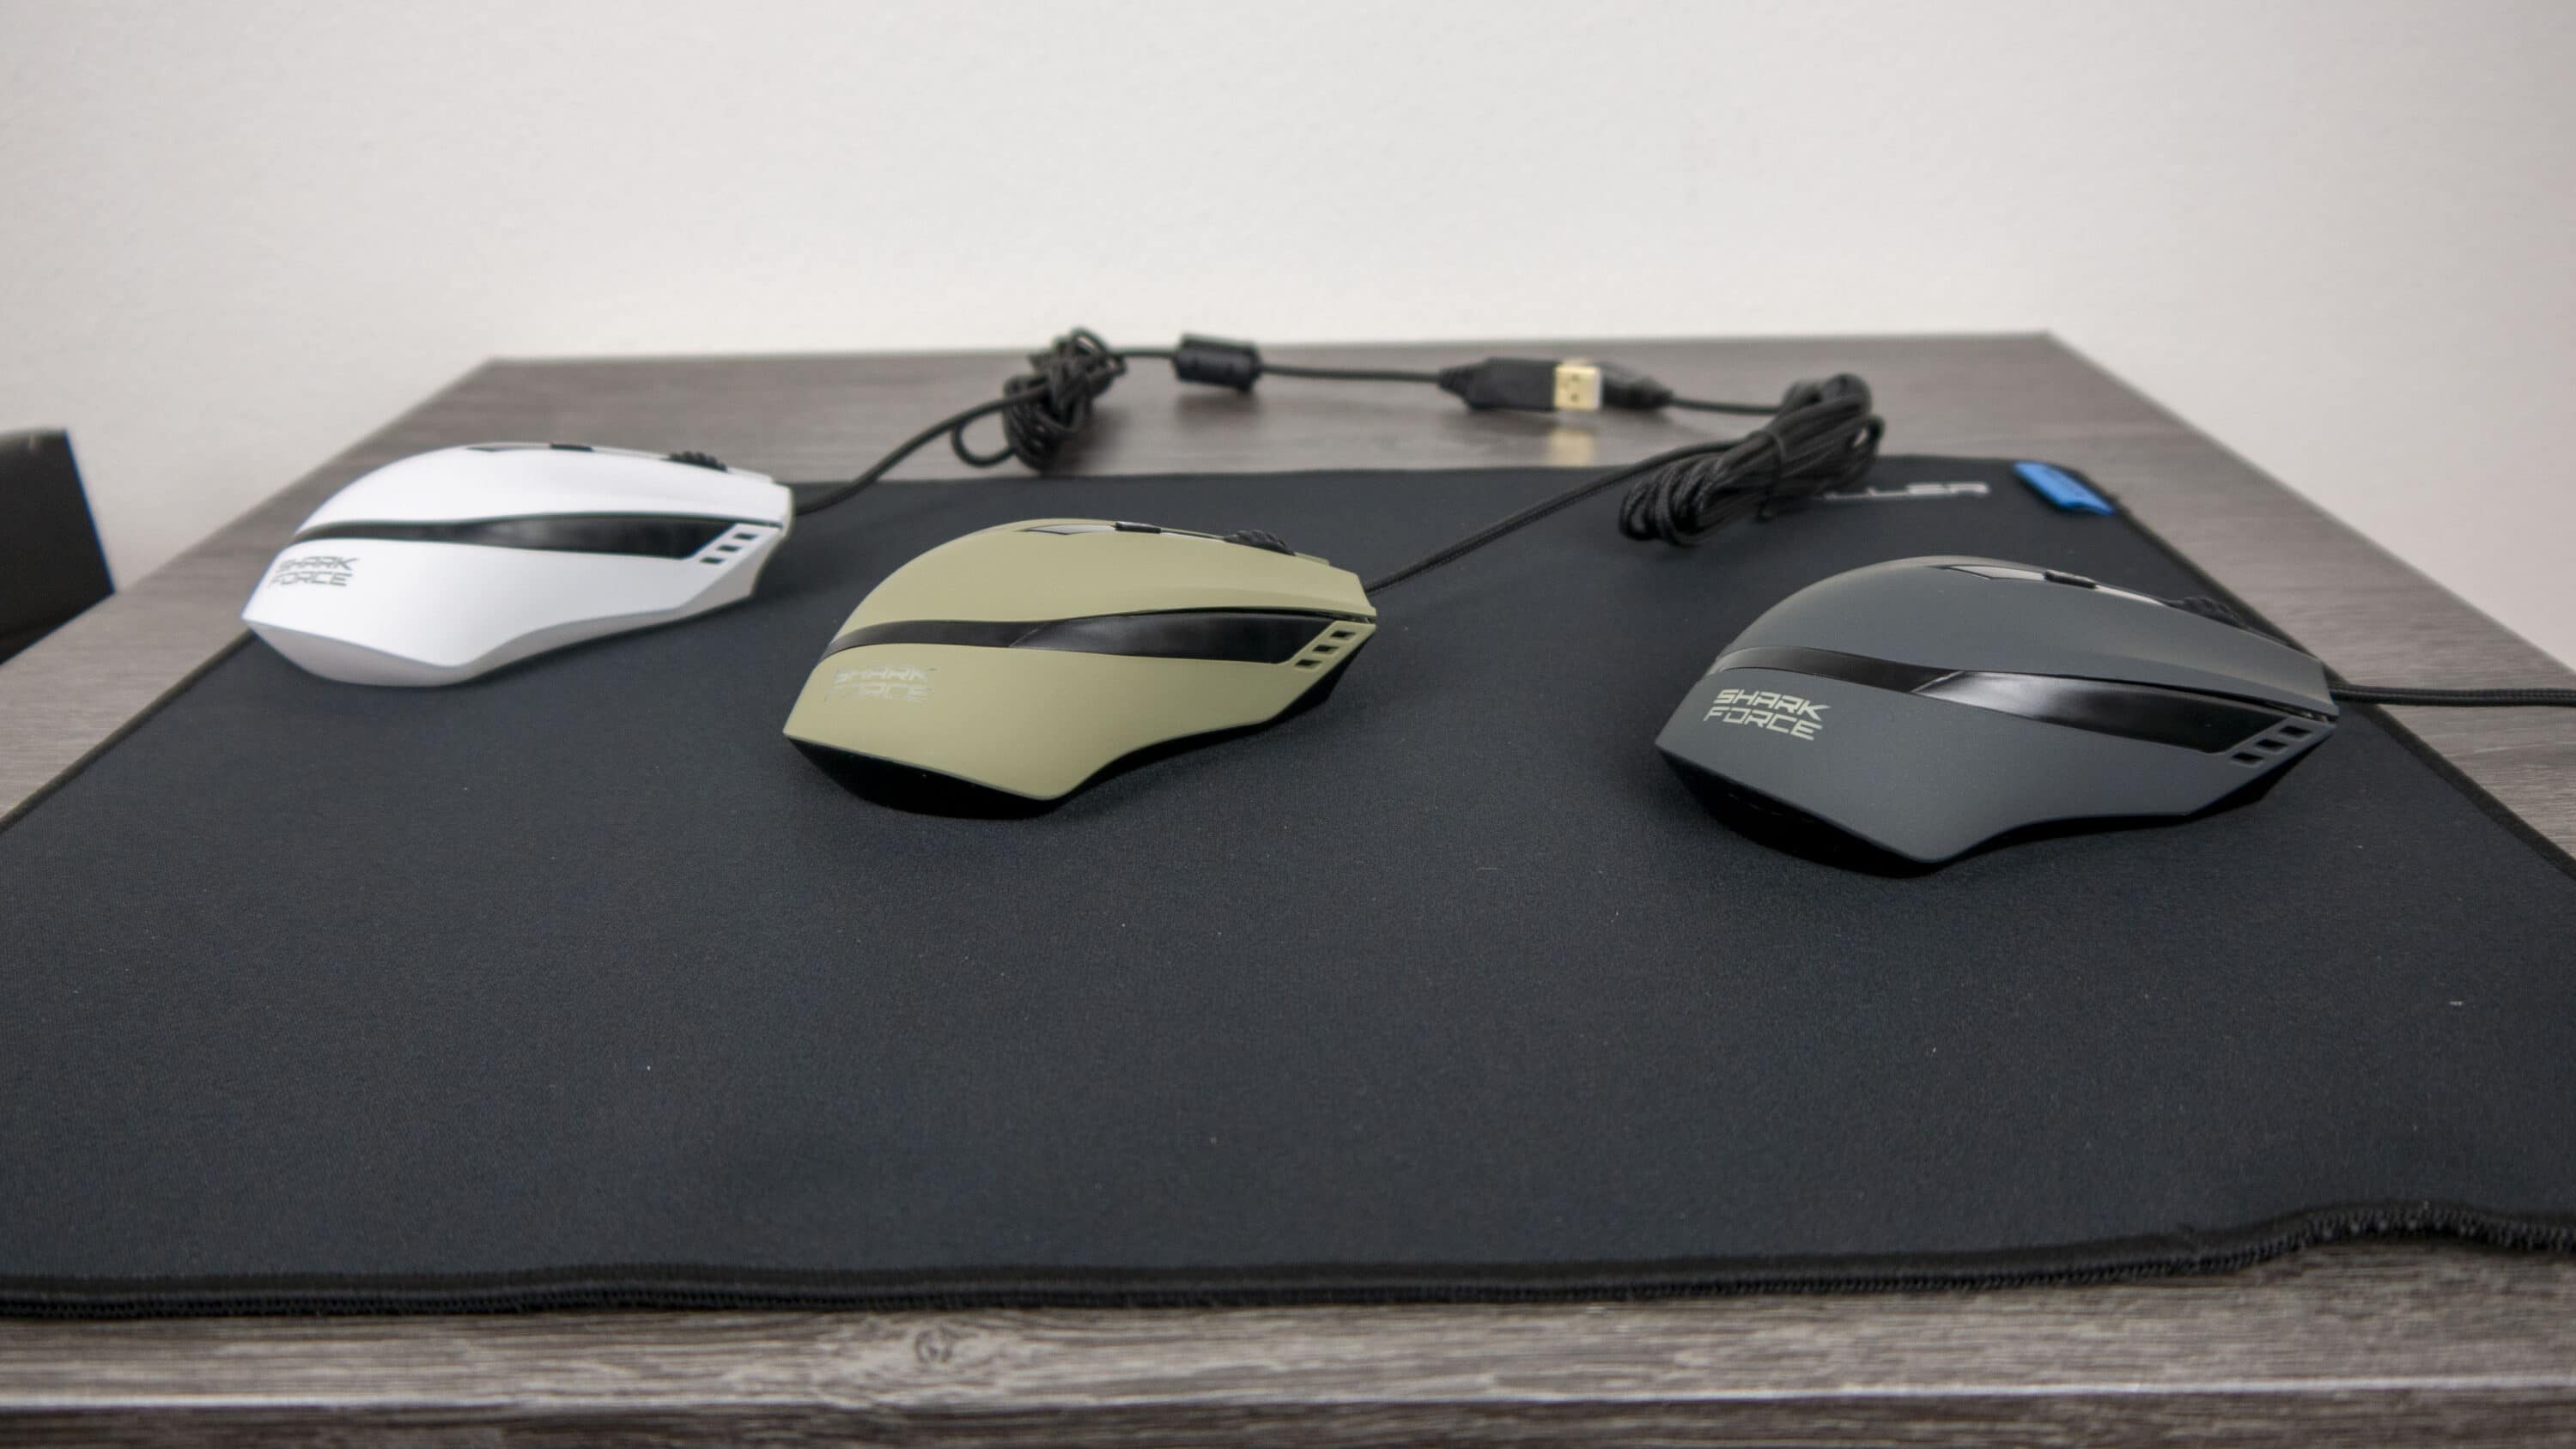 or Force mouse ll in test Cheap Shark Sharkoon low-priced? gaming The